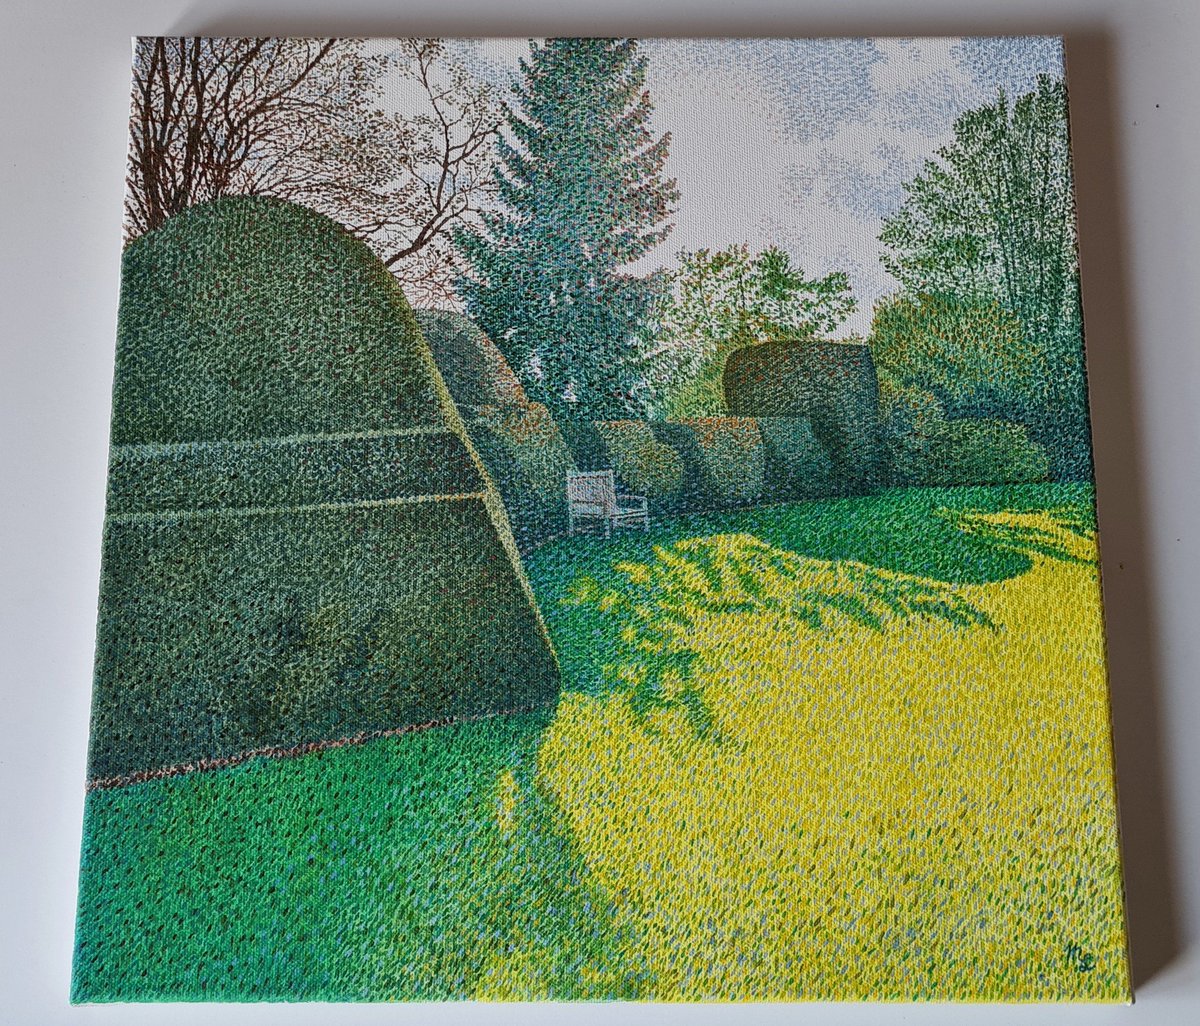 Only a last effect to add then it should be done.

#oilpainting #wipart #holmepierrepont #countrygarden #topiary #garden